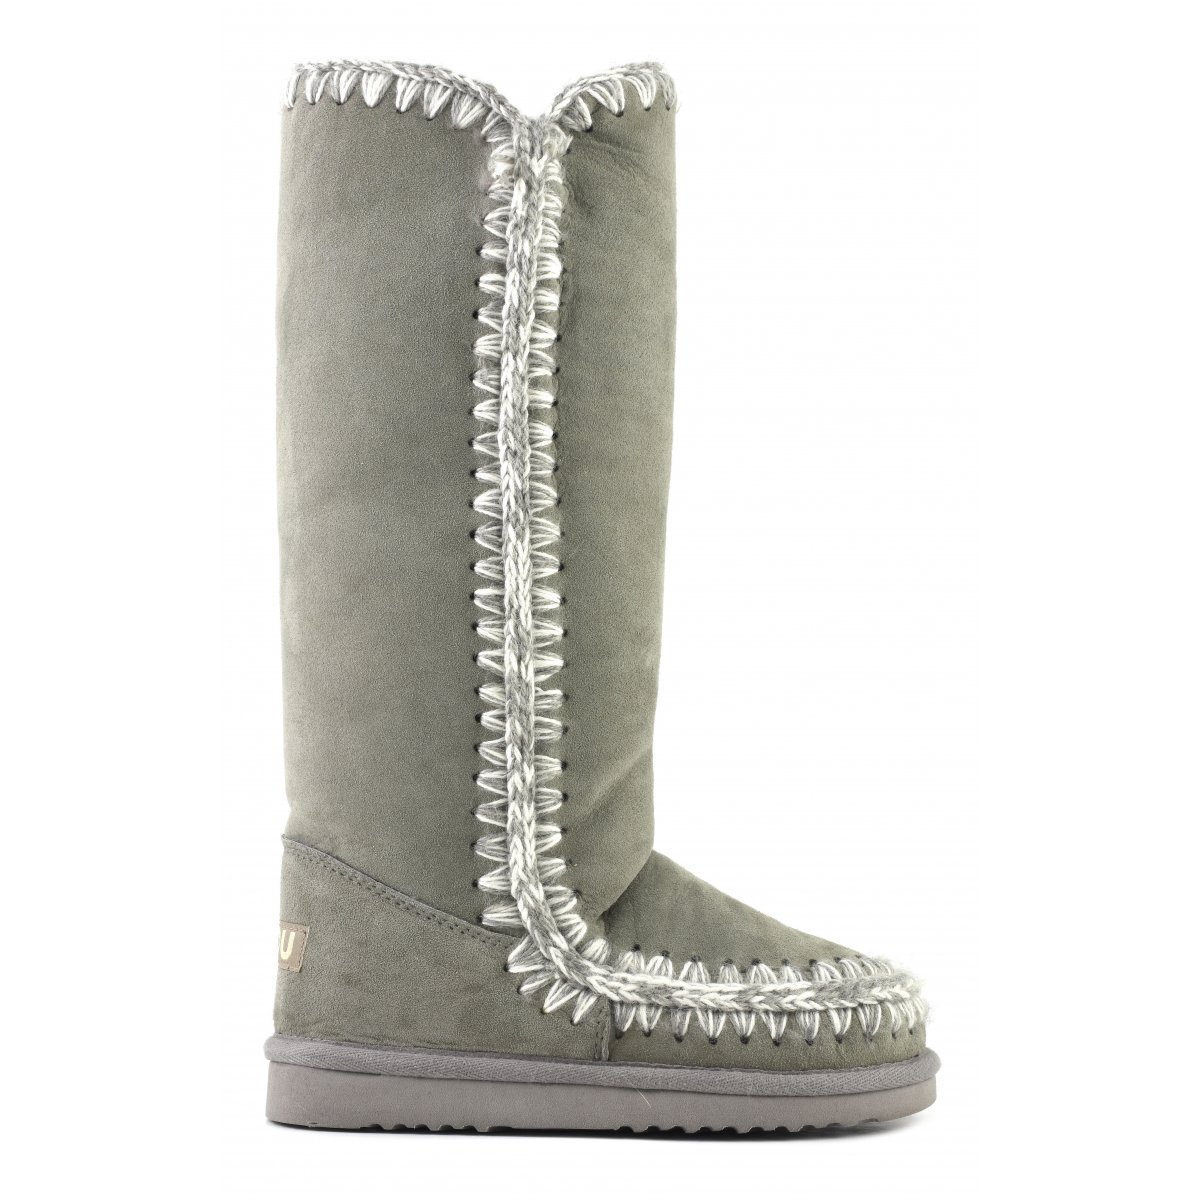 mou winter boots